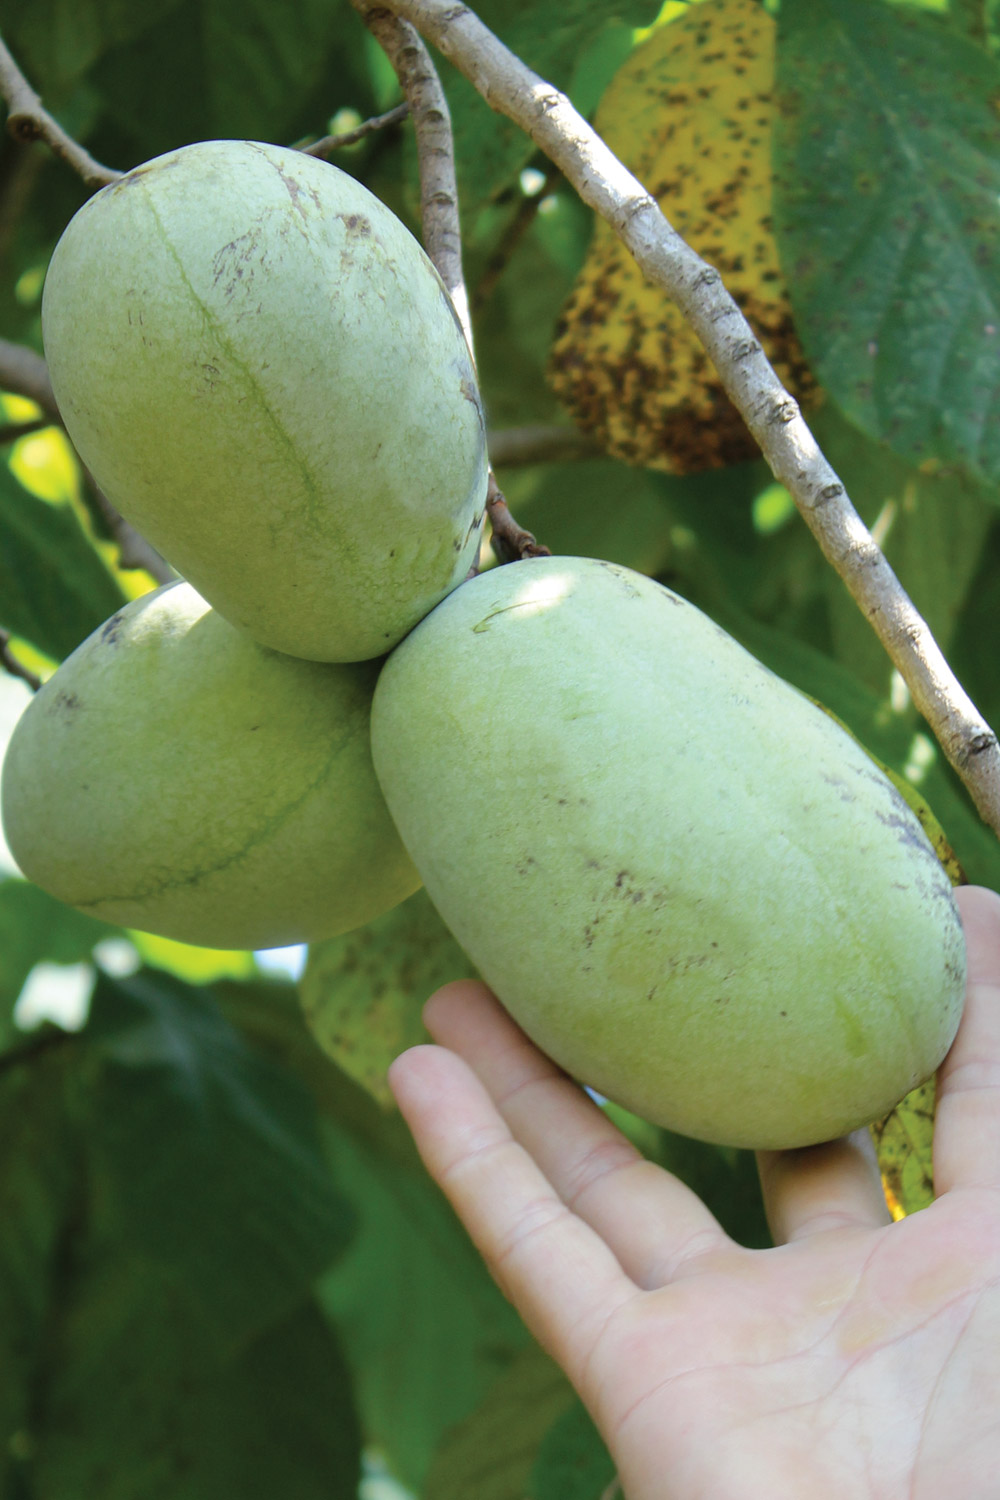 Picking pawpaws off the tree, minty green fruits that fit easily in your hand.